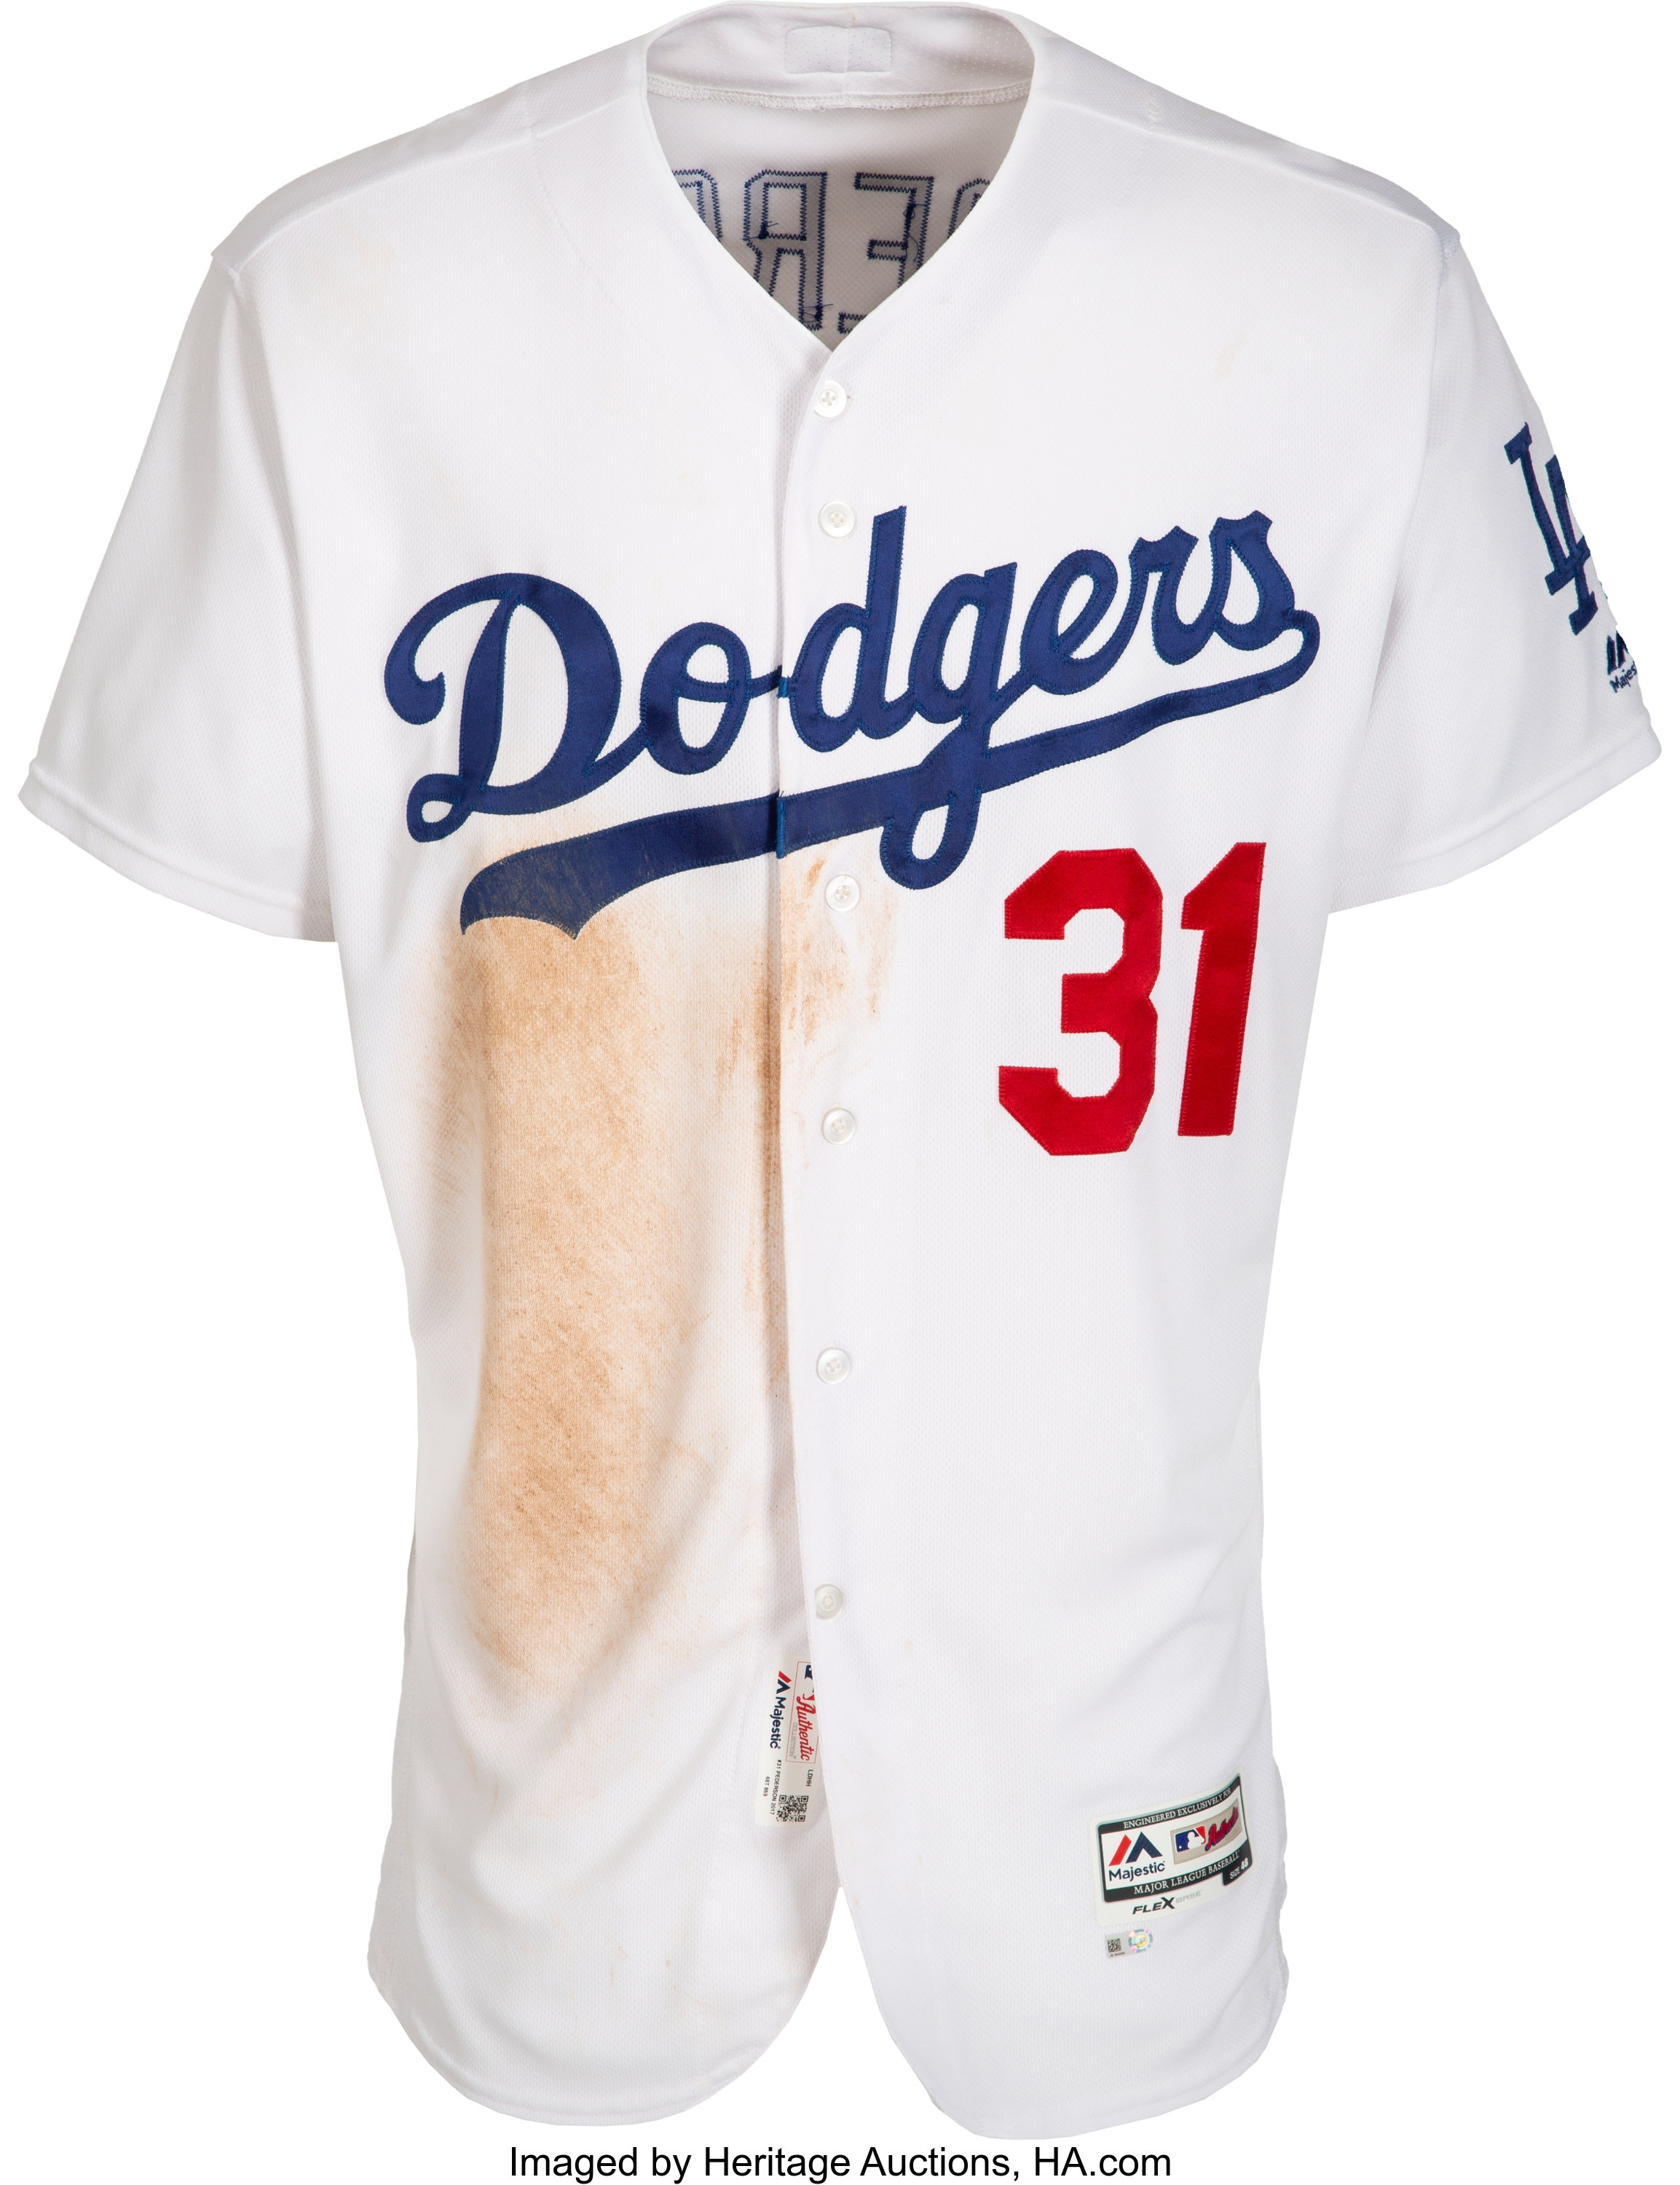 LA dodger outfit, liquor store, photography  Dodgers outfit, Gaming  clothes, Baseball game outfits